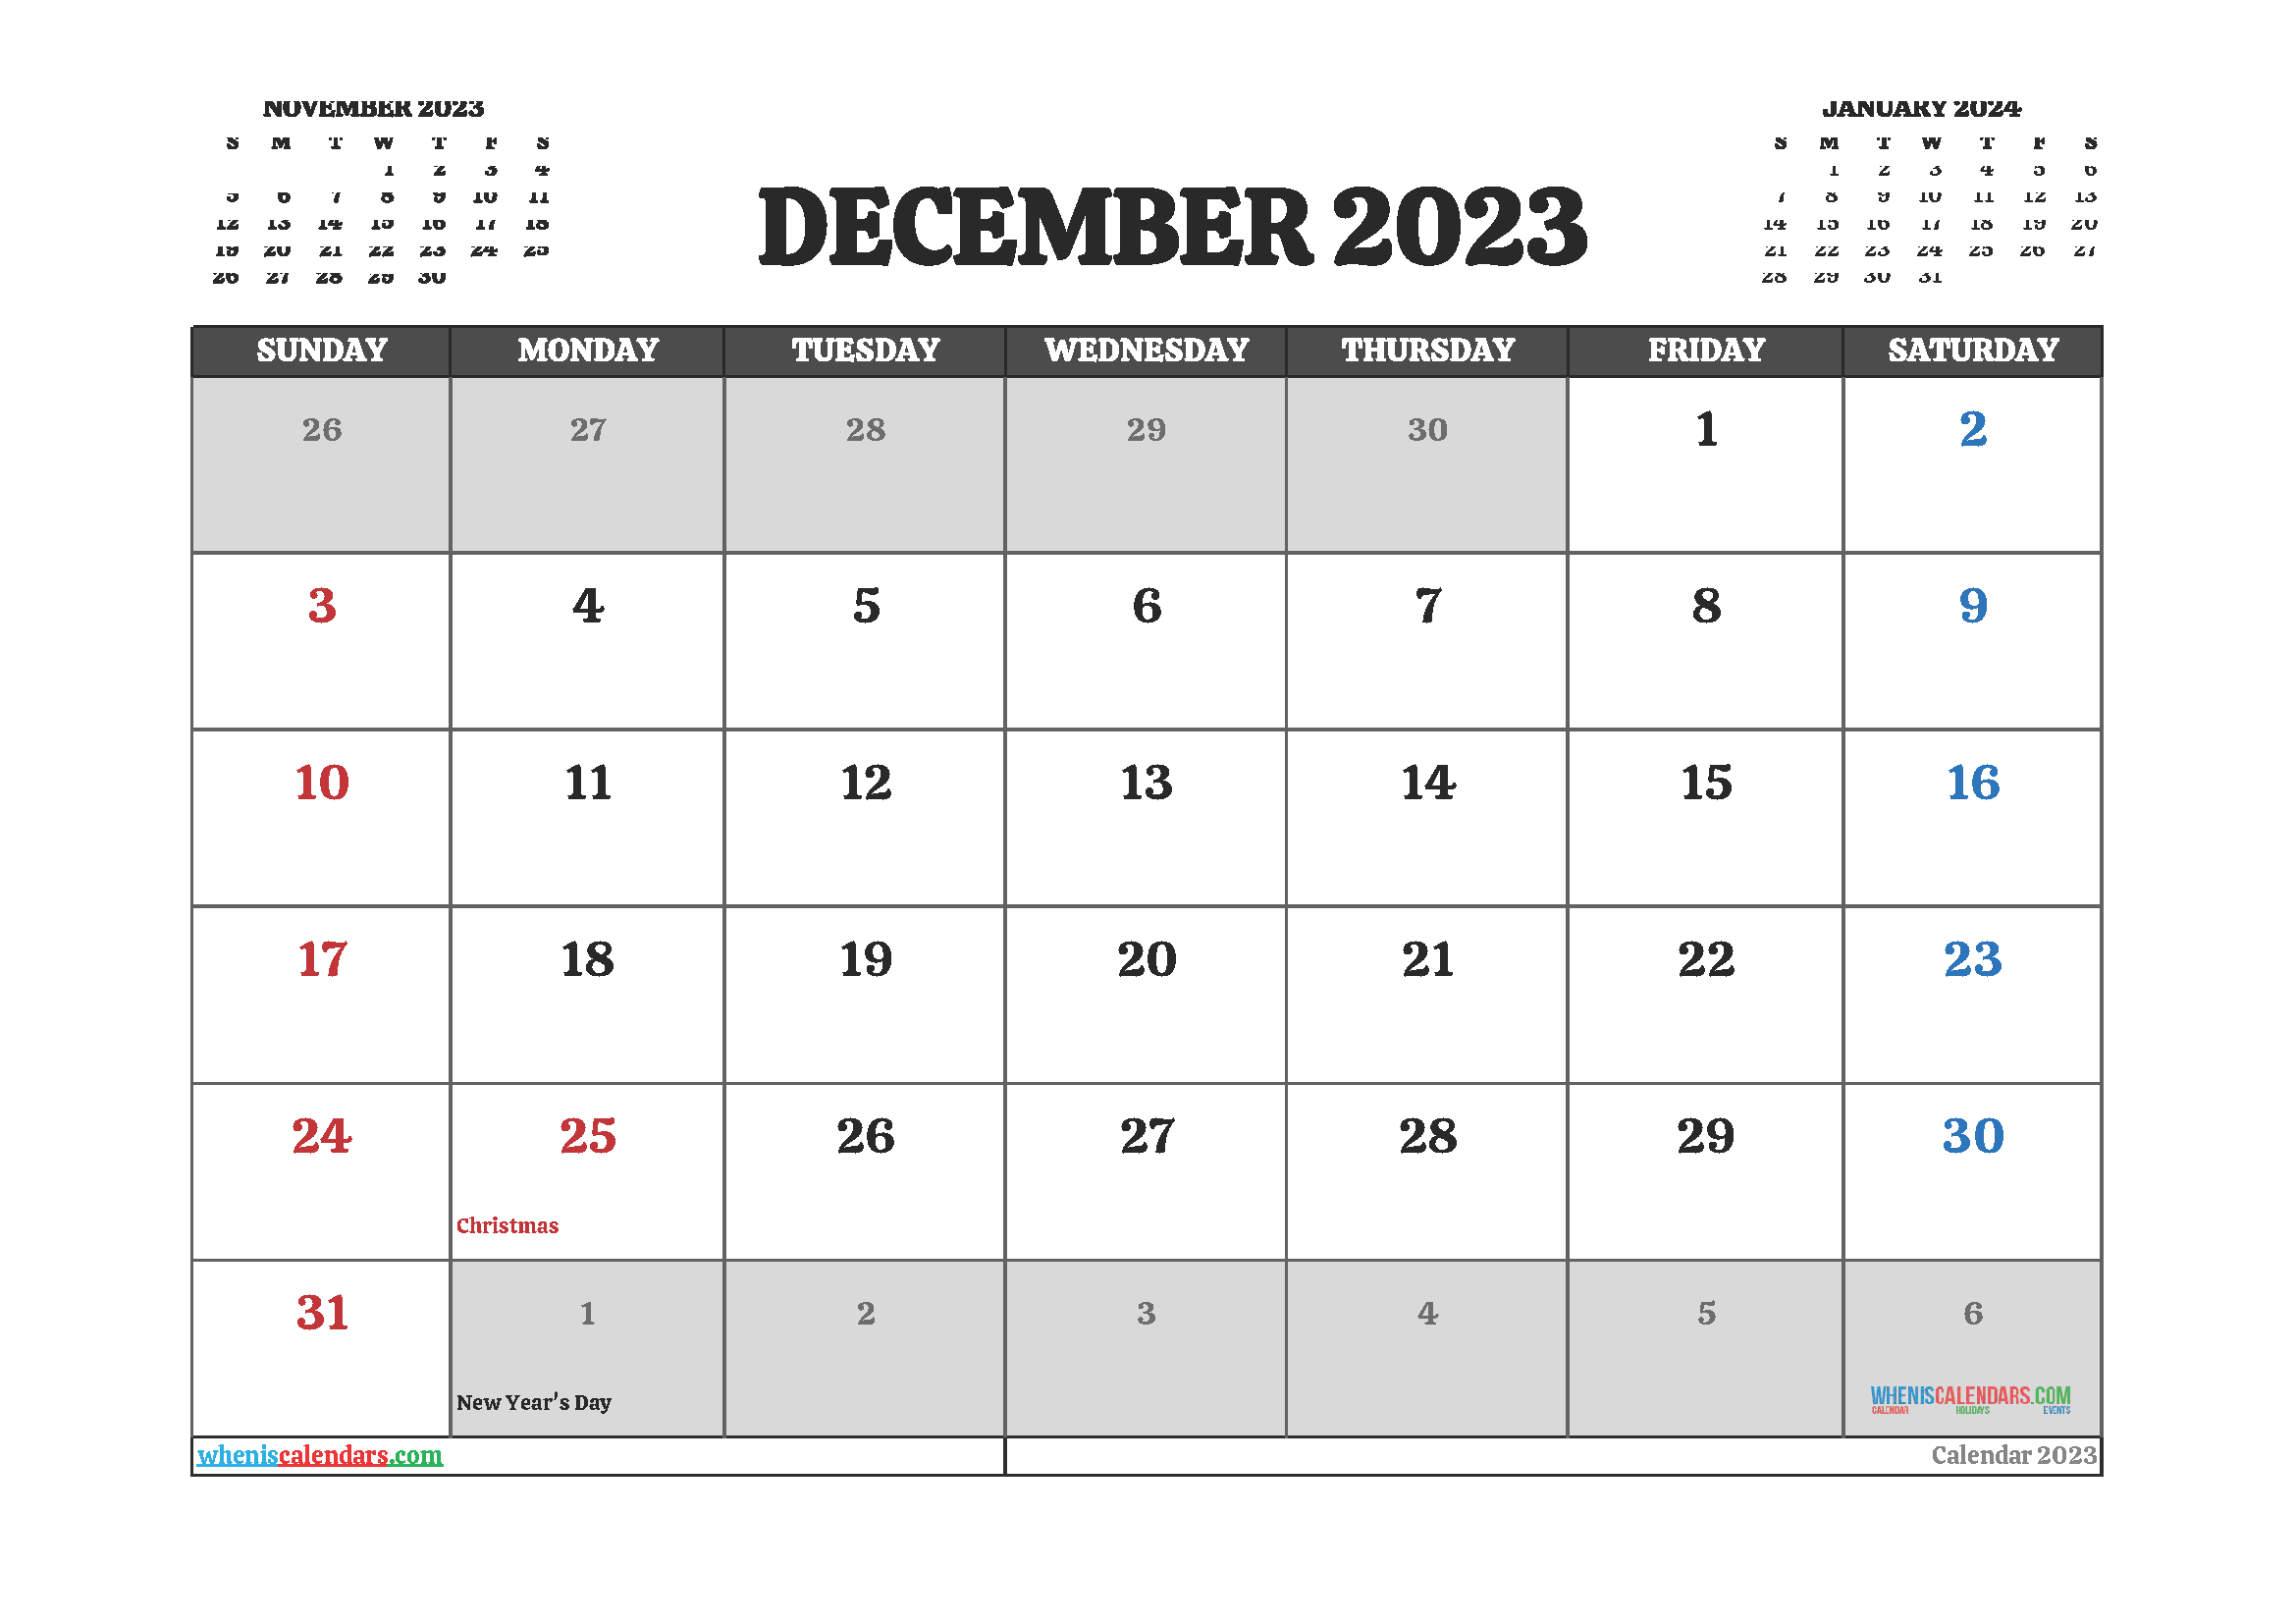 Show Me The Month Of December Calendar 2023 Best Amazing List Of Seaside Calendar Of Events 2023